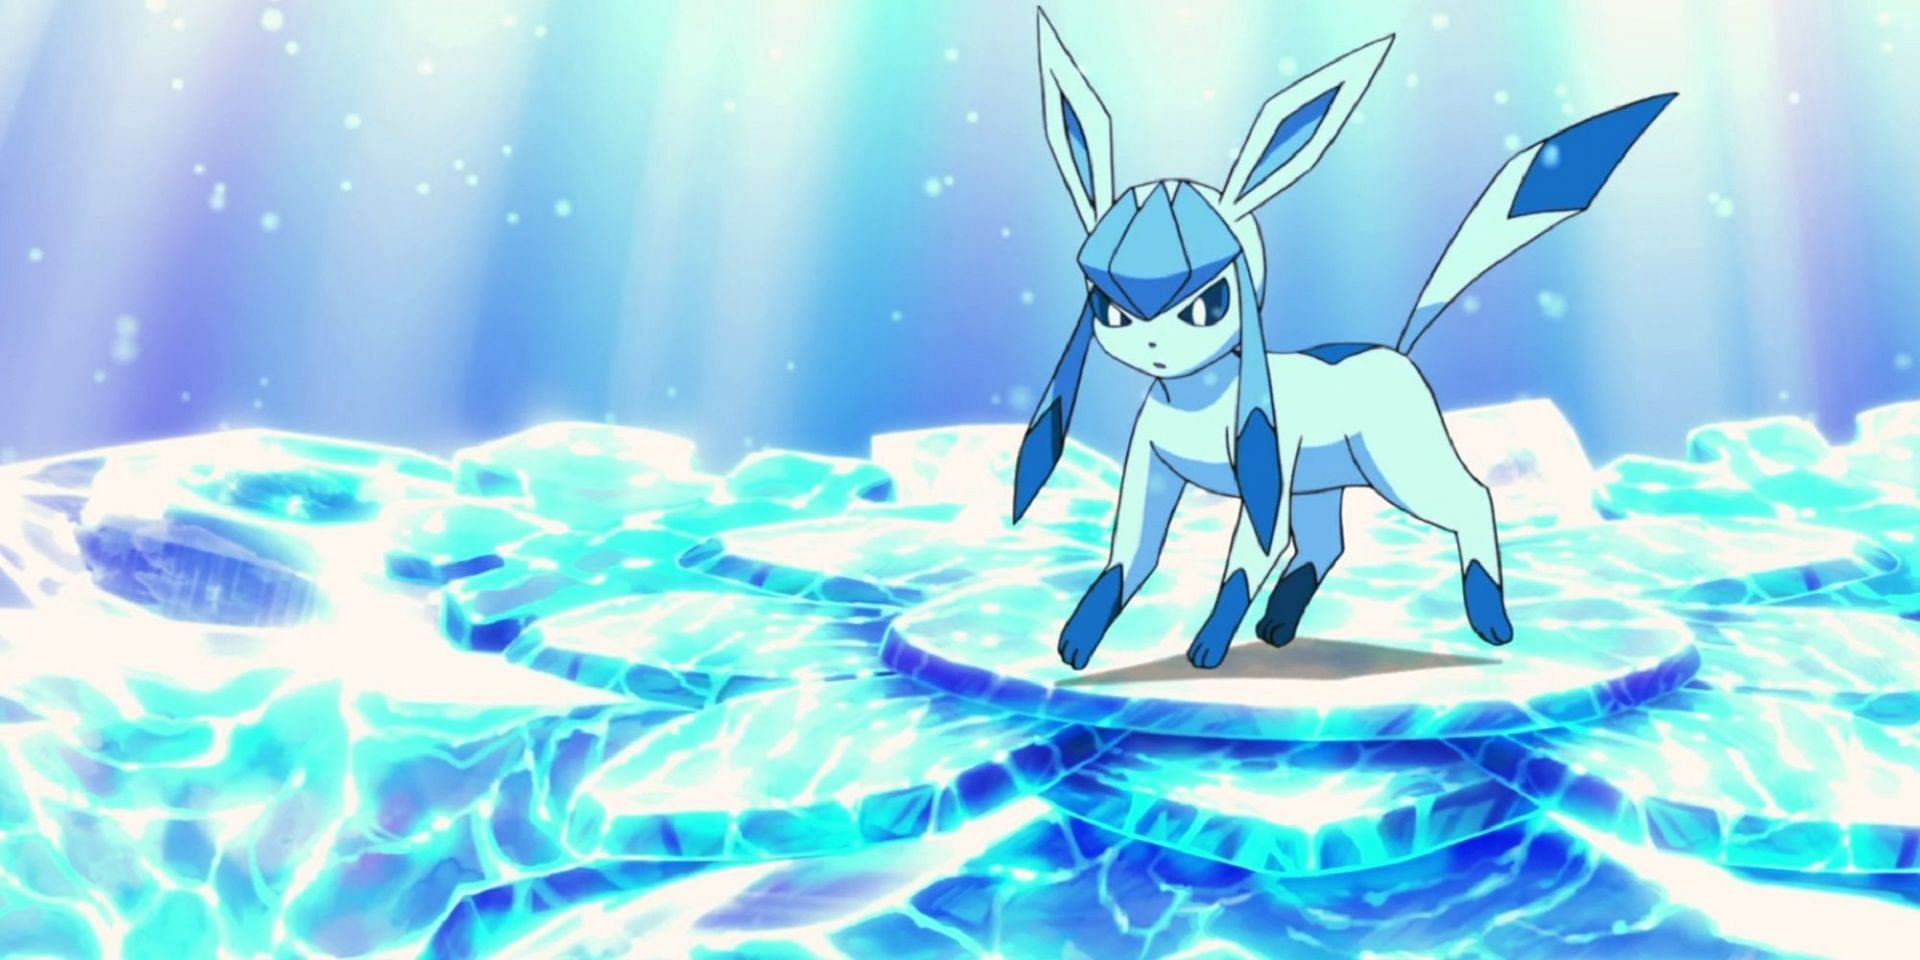 Glaceon was introduced in Generation IV (Image via The Pokemon Company) .